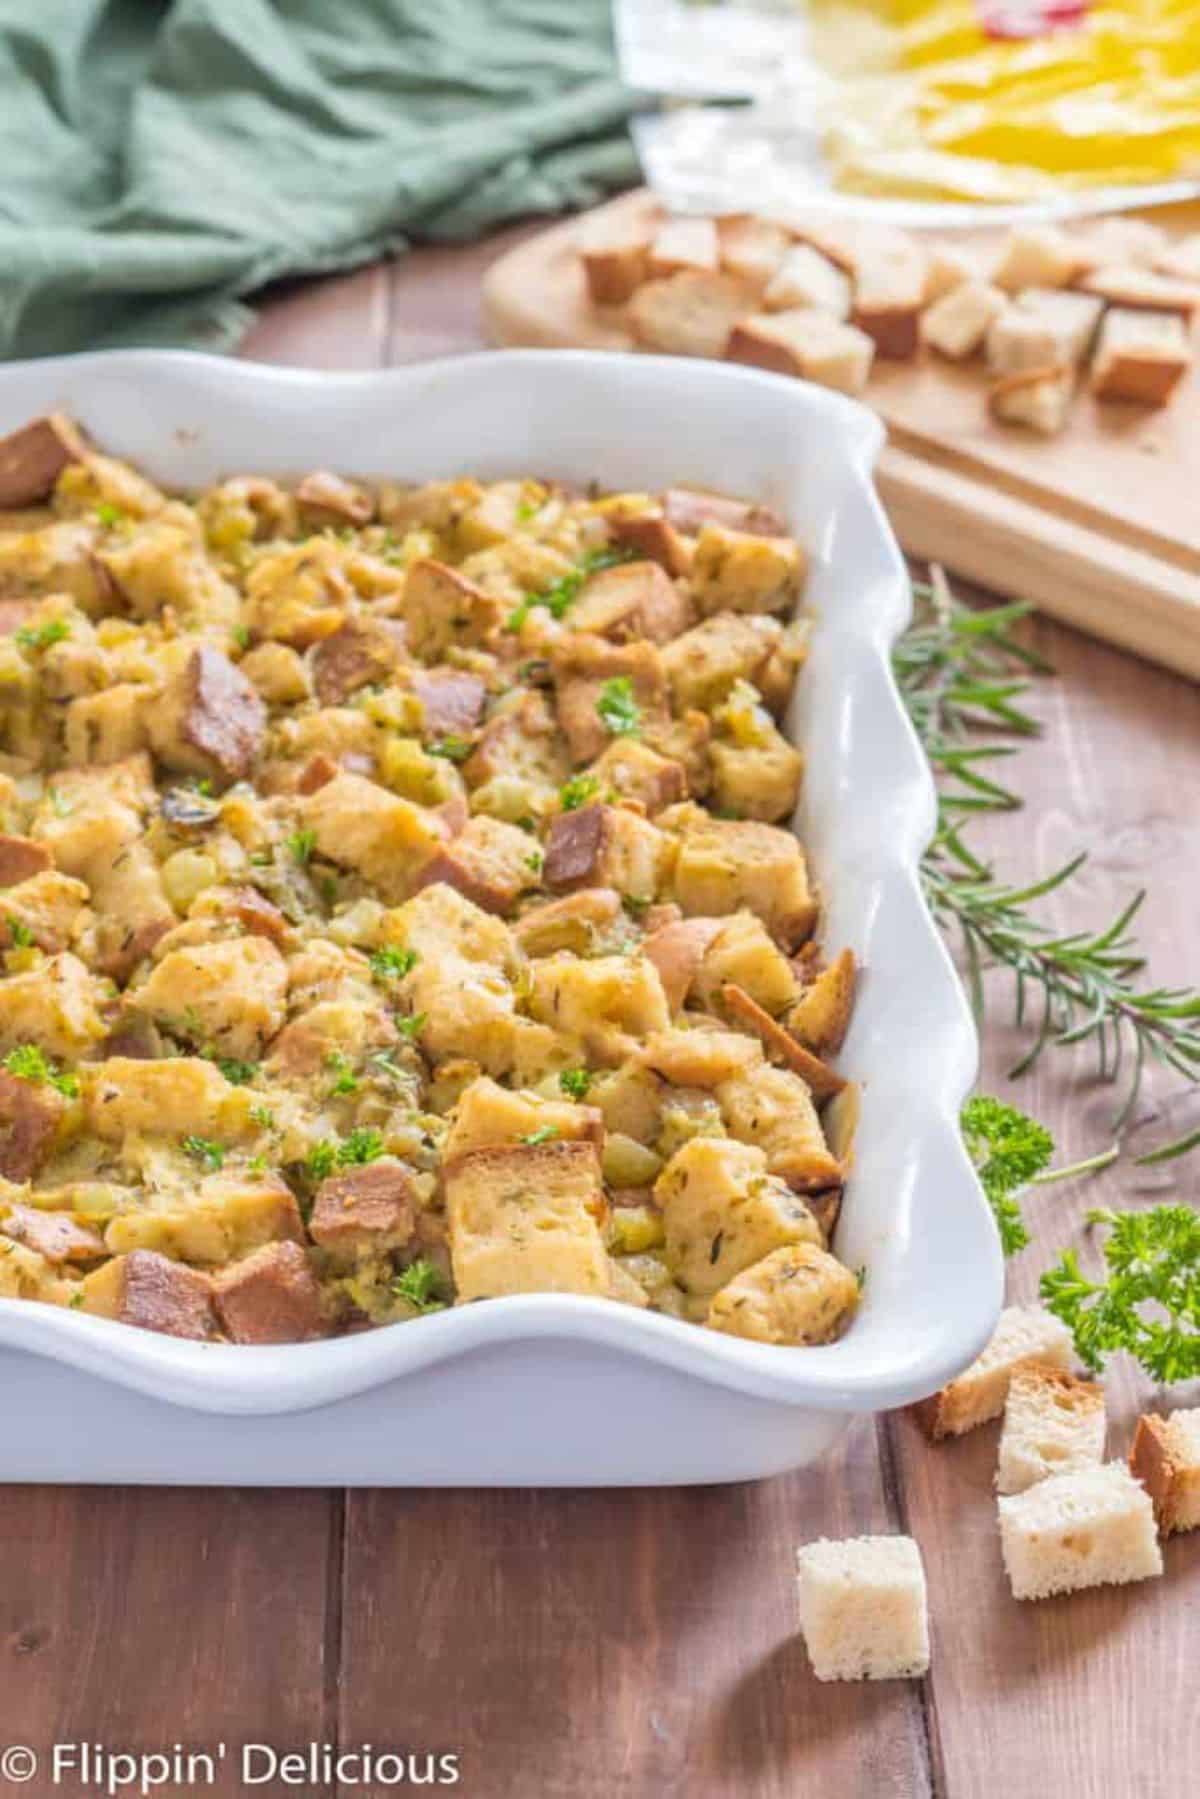 Gluten-Free Stuffing with Green Chile in a white bowl.